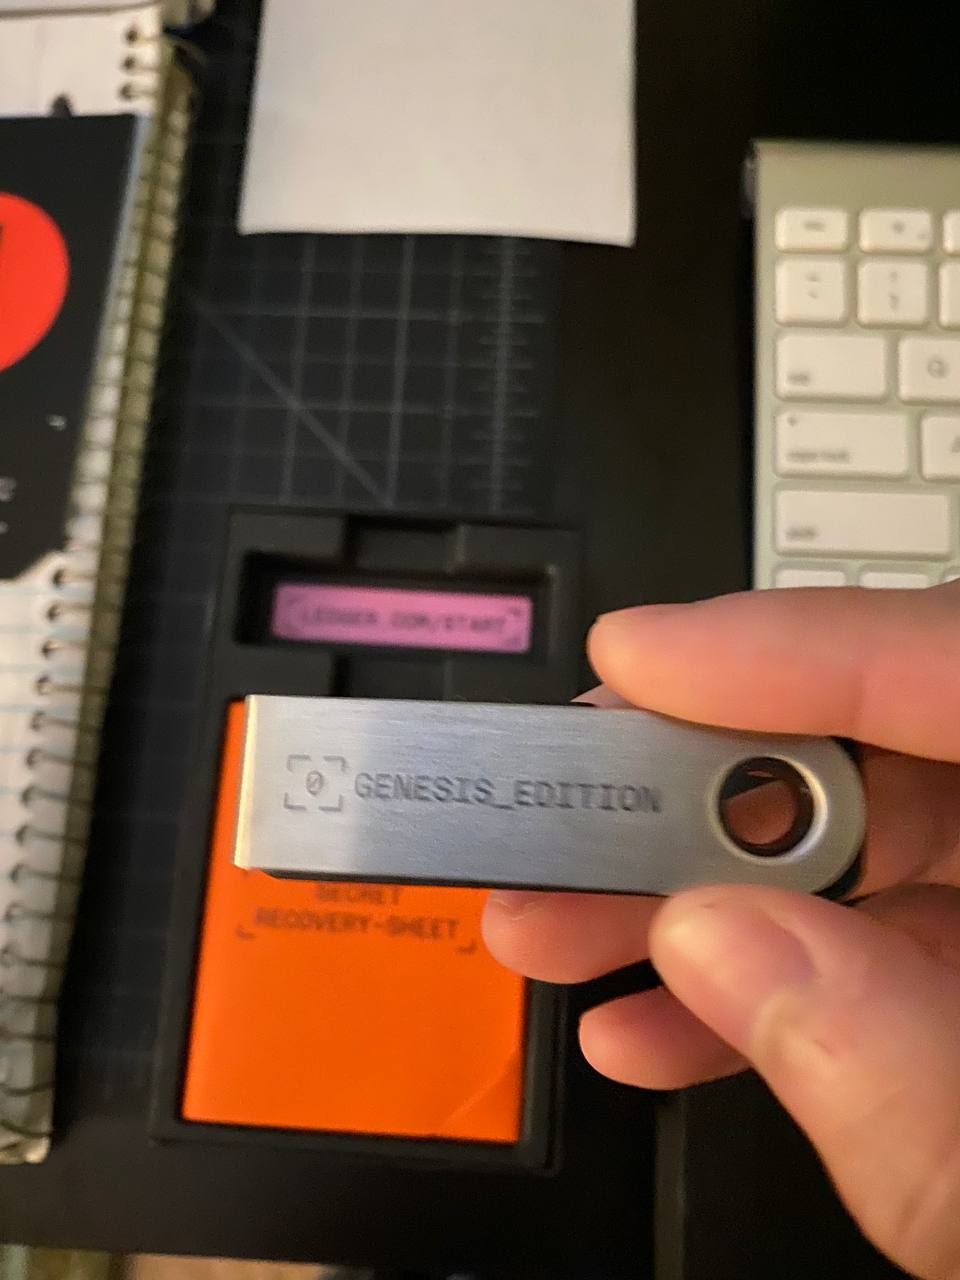 I picked Ledger because I found a great deal on the new Nano S Plus and the company has been known in the crypto space for their reliability and simplicity.